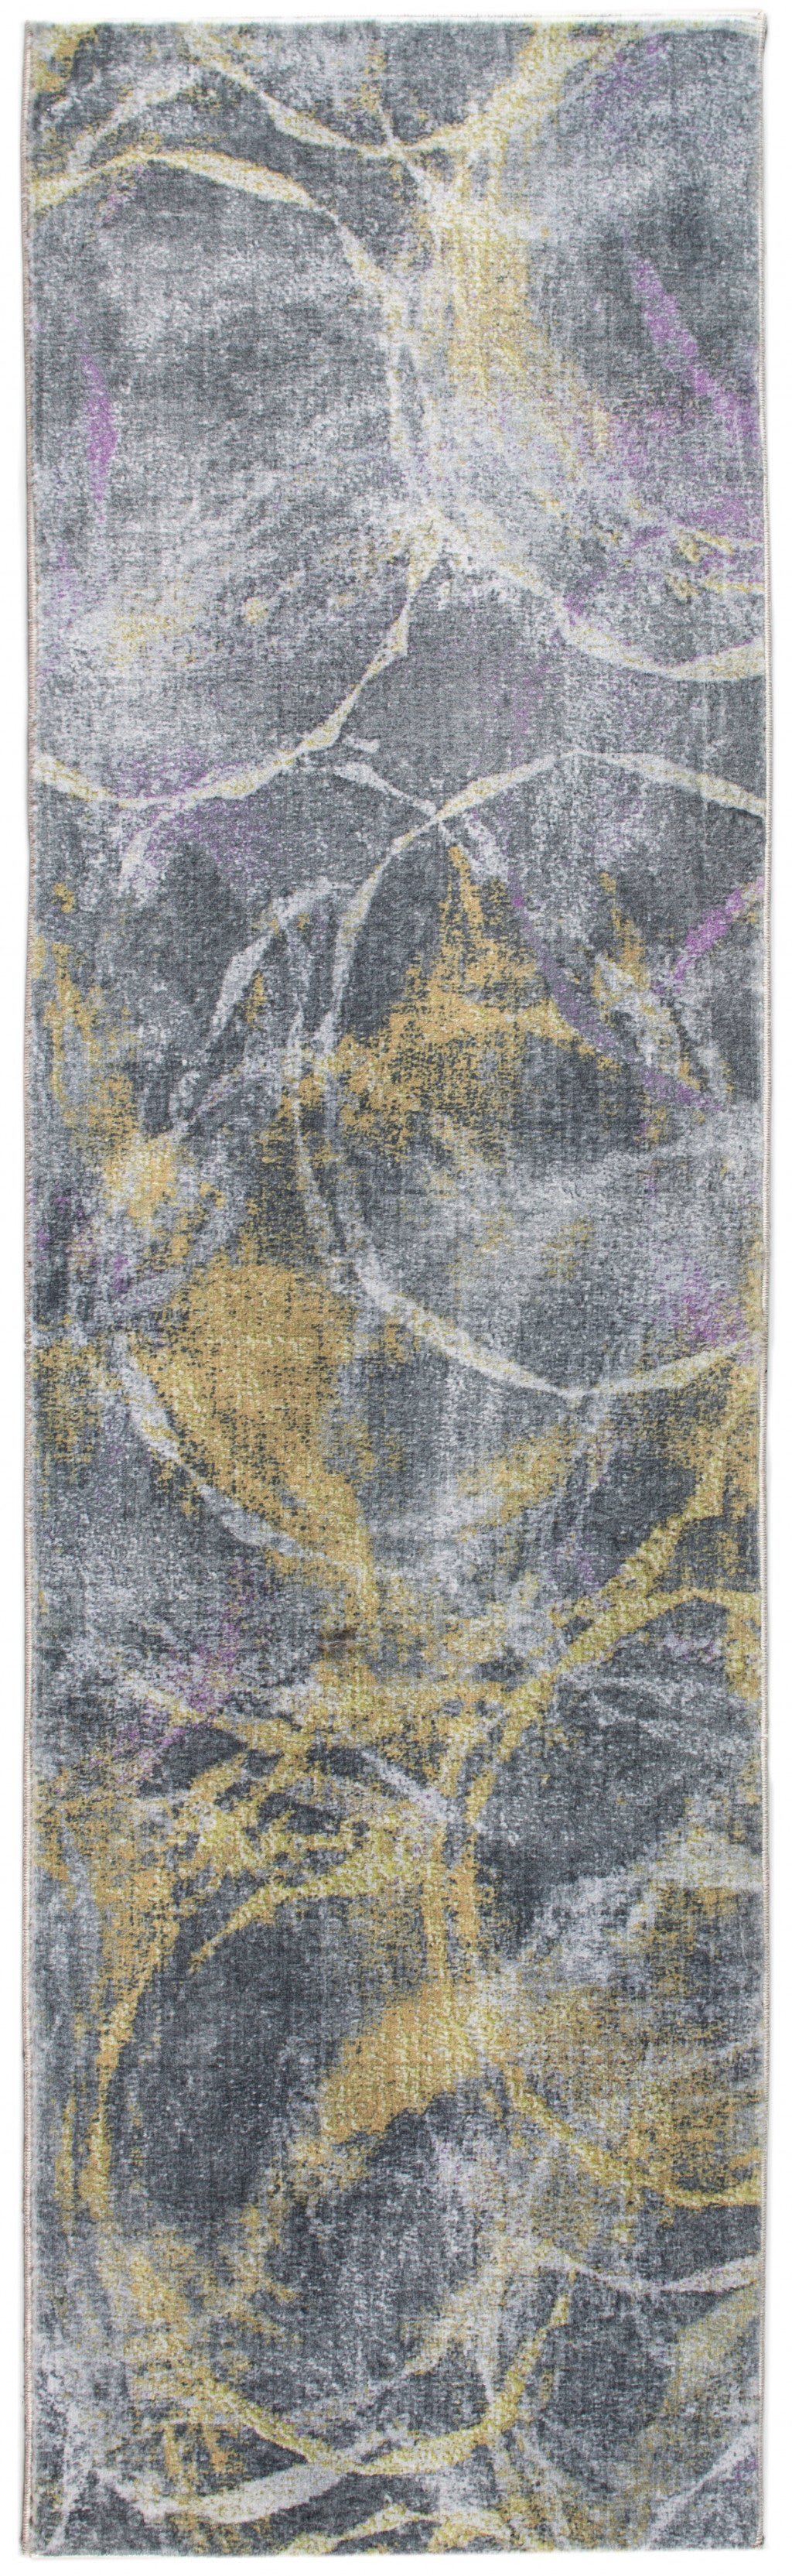 5’ x 8’ Gray Gold Abstract Rings Area Rug